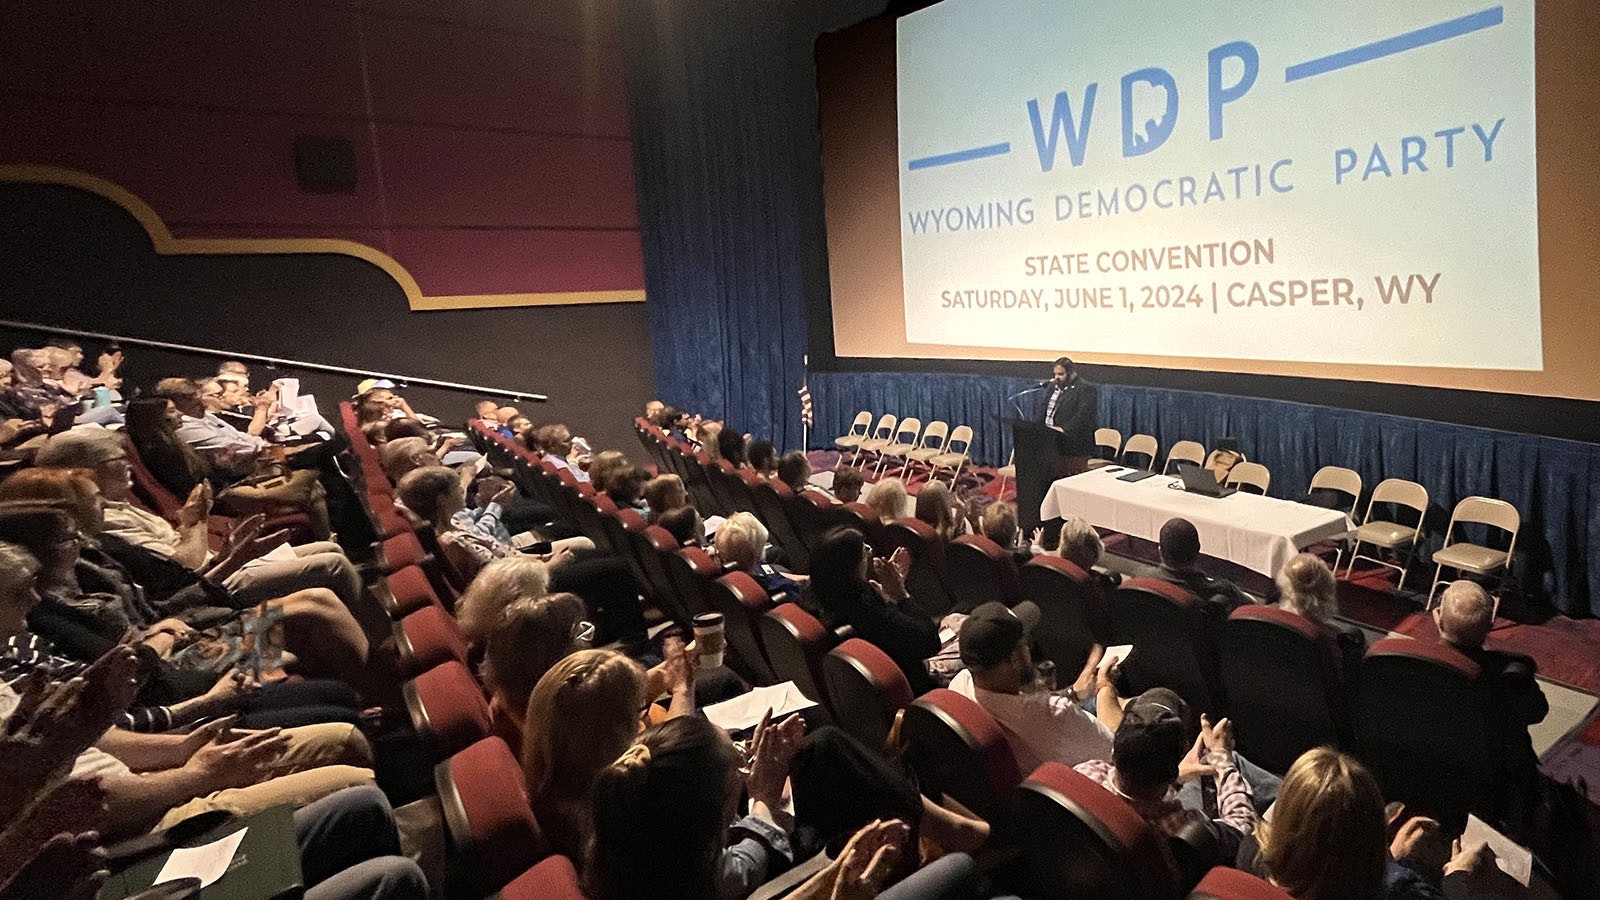 The Wyoming Democratic Party meets for its 2024 convention at the Lyric Theater in Casper on Saturday.